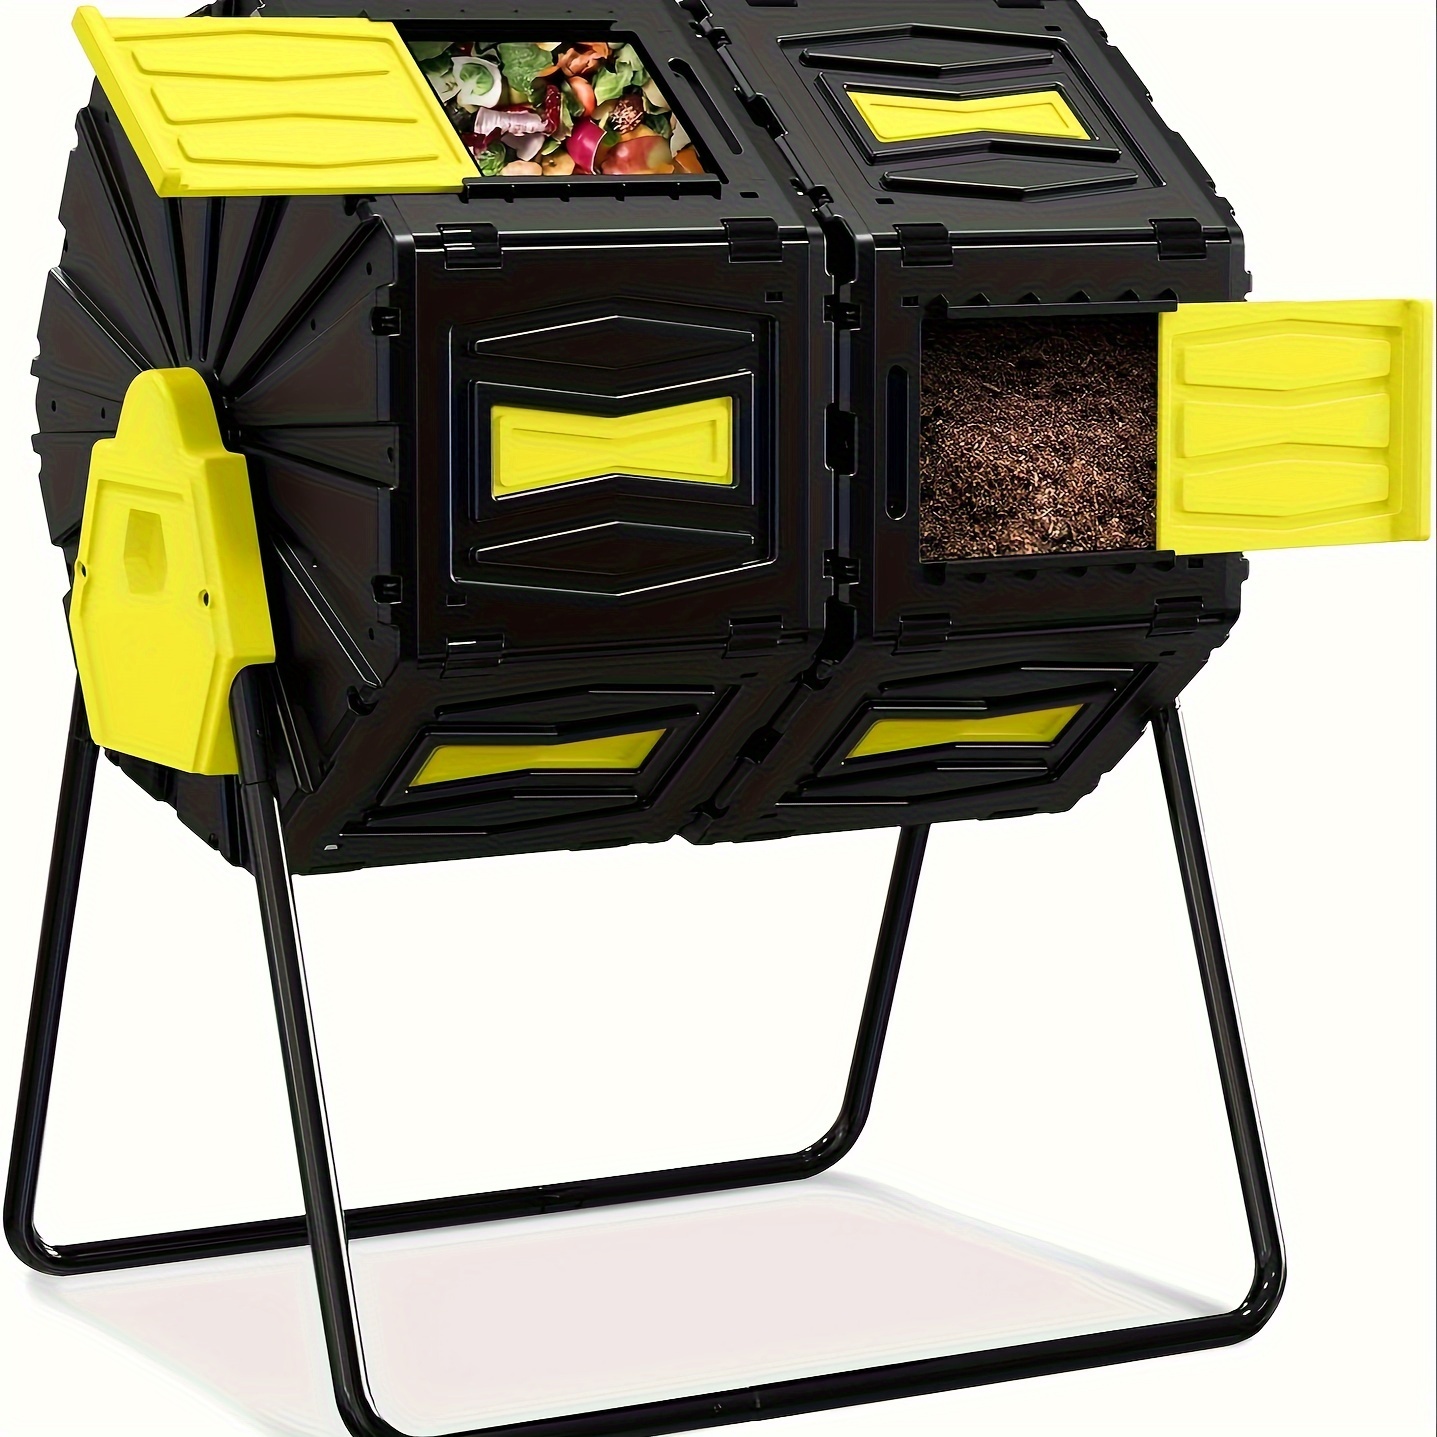 

Compost Tumbler, Easy Assemble & Efficient Outdoor Compost Bin, 45 Gallon/170 Liter Large Dual Chamber Rotating Composter For Garden, Kitchen, And Yard Waste,